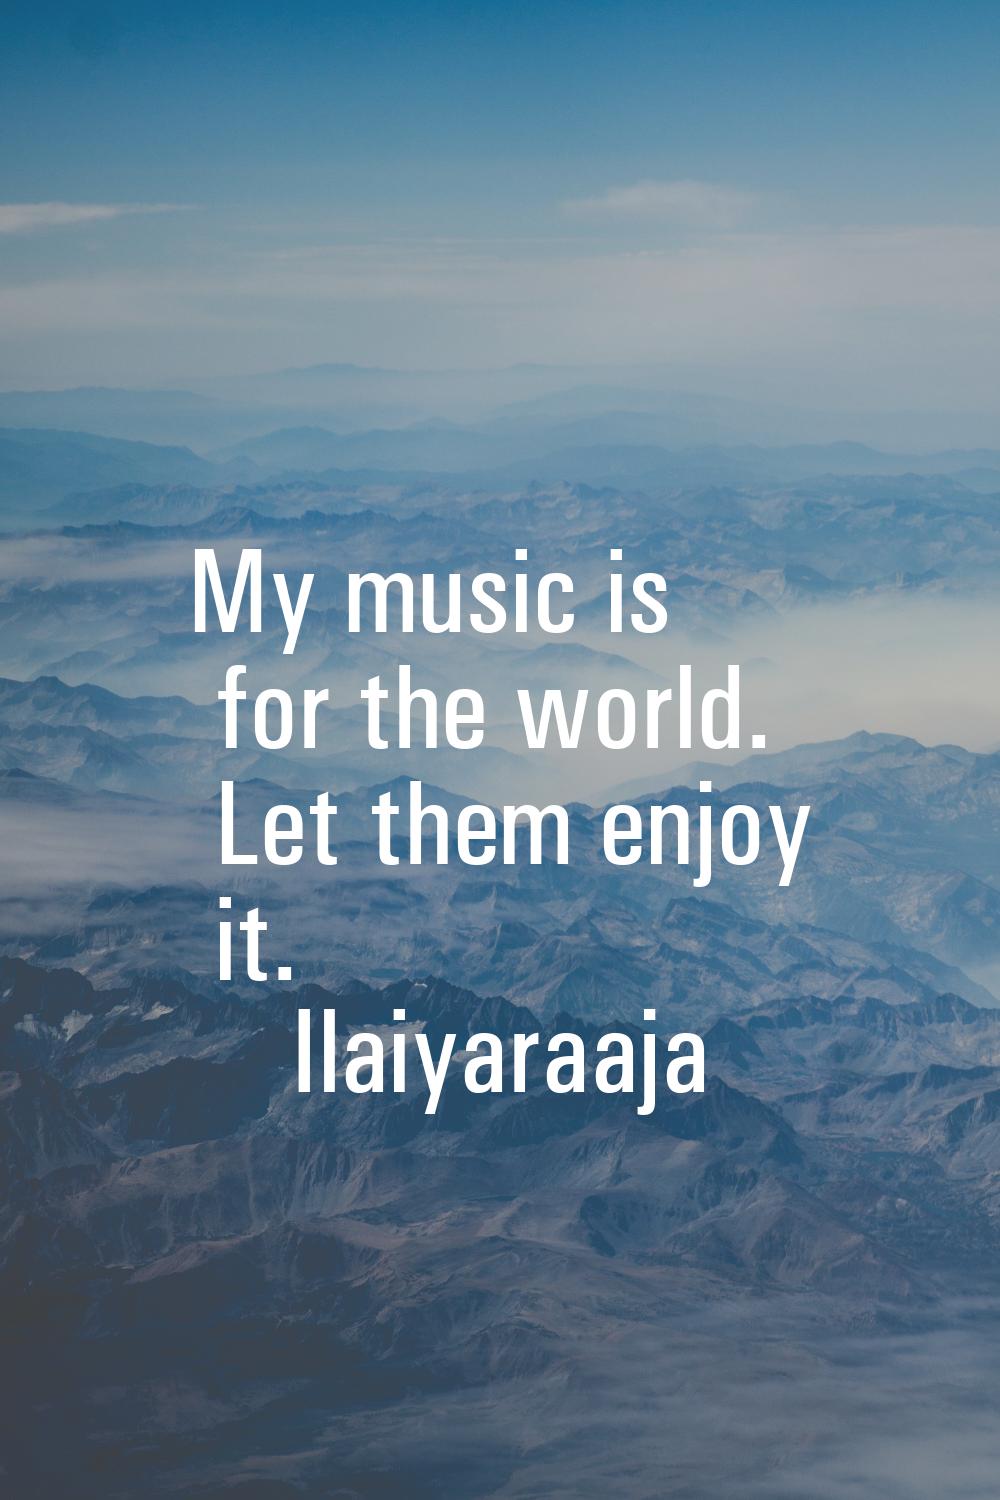 My music is for the world. Let them enjoy it.